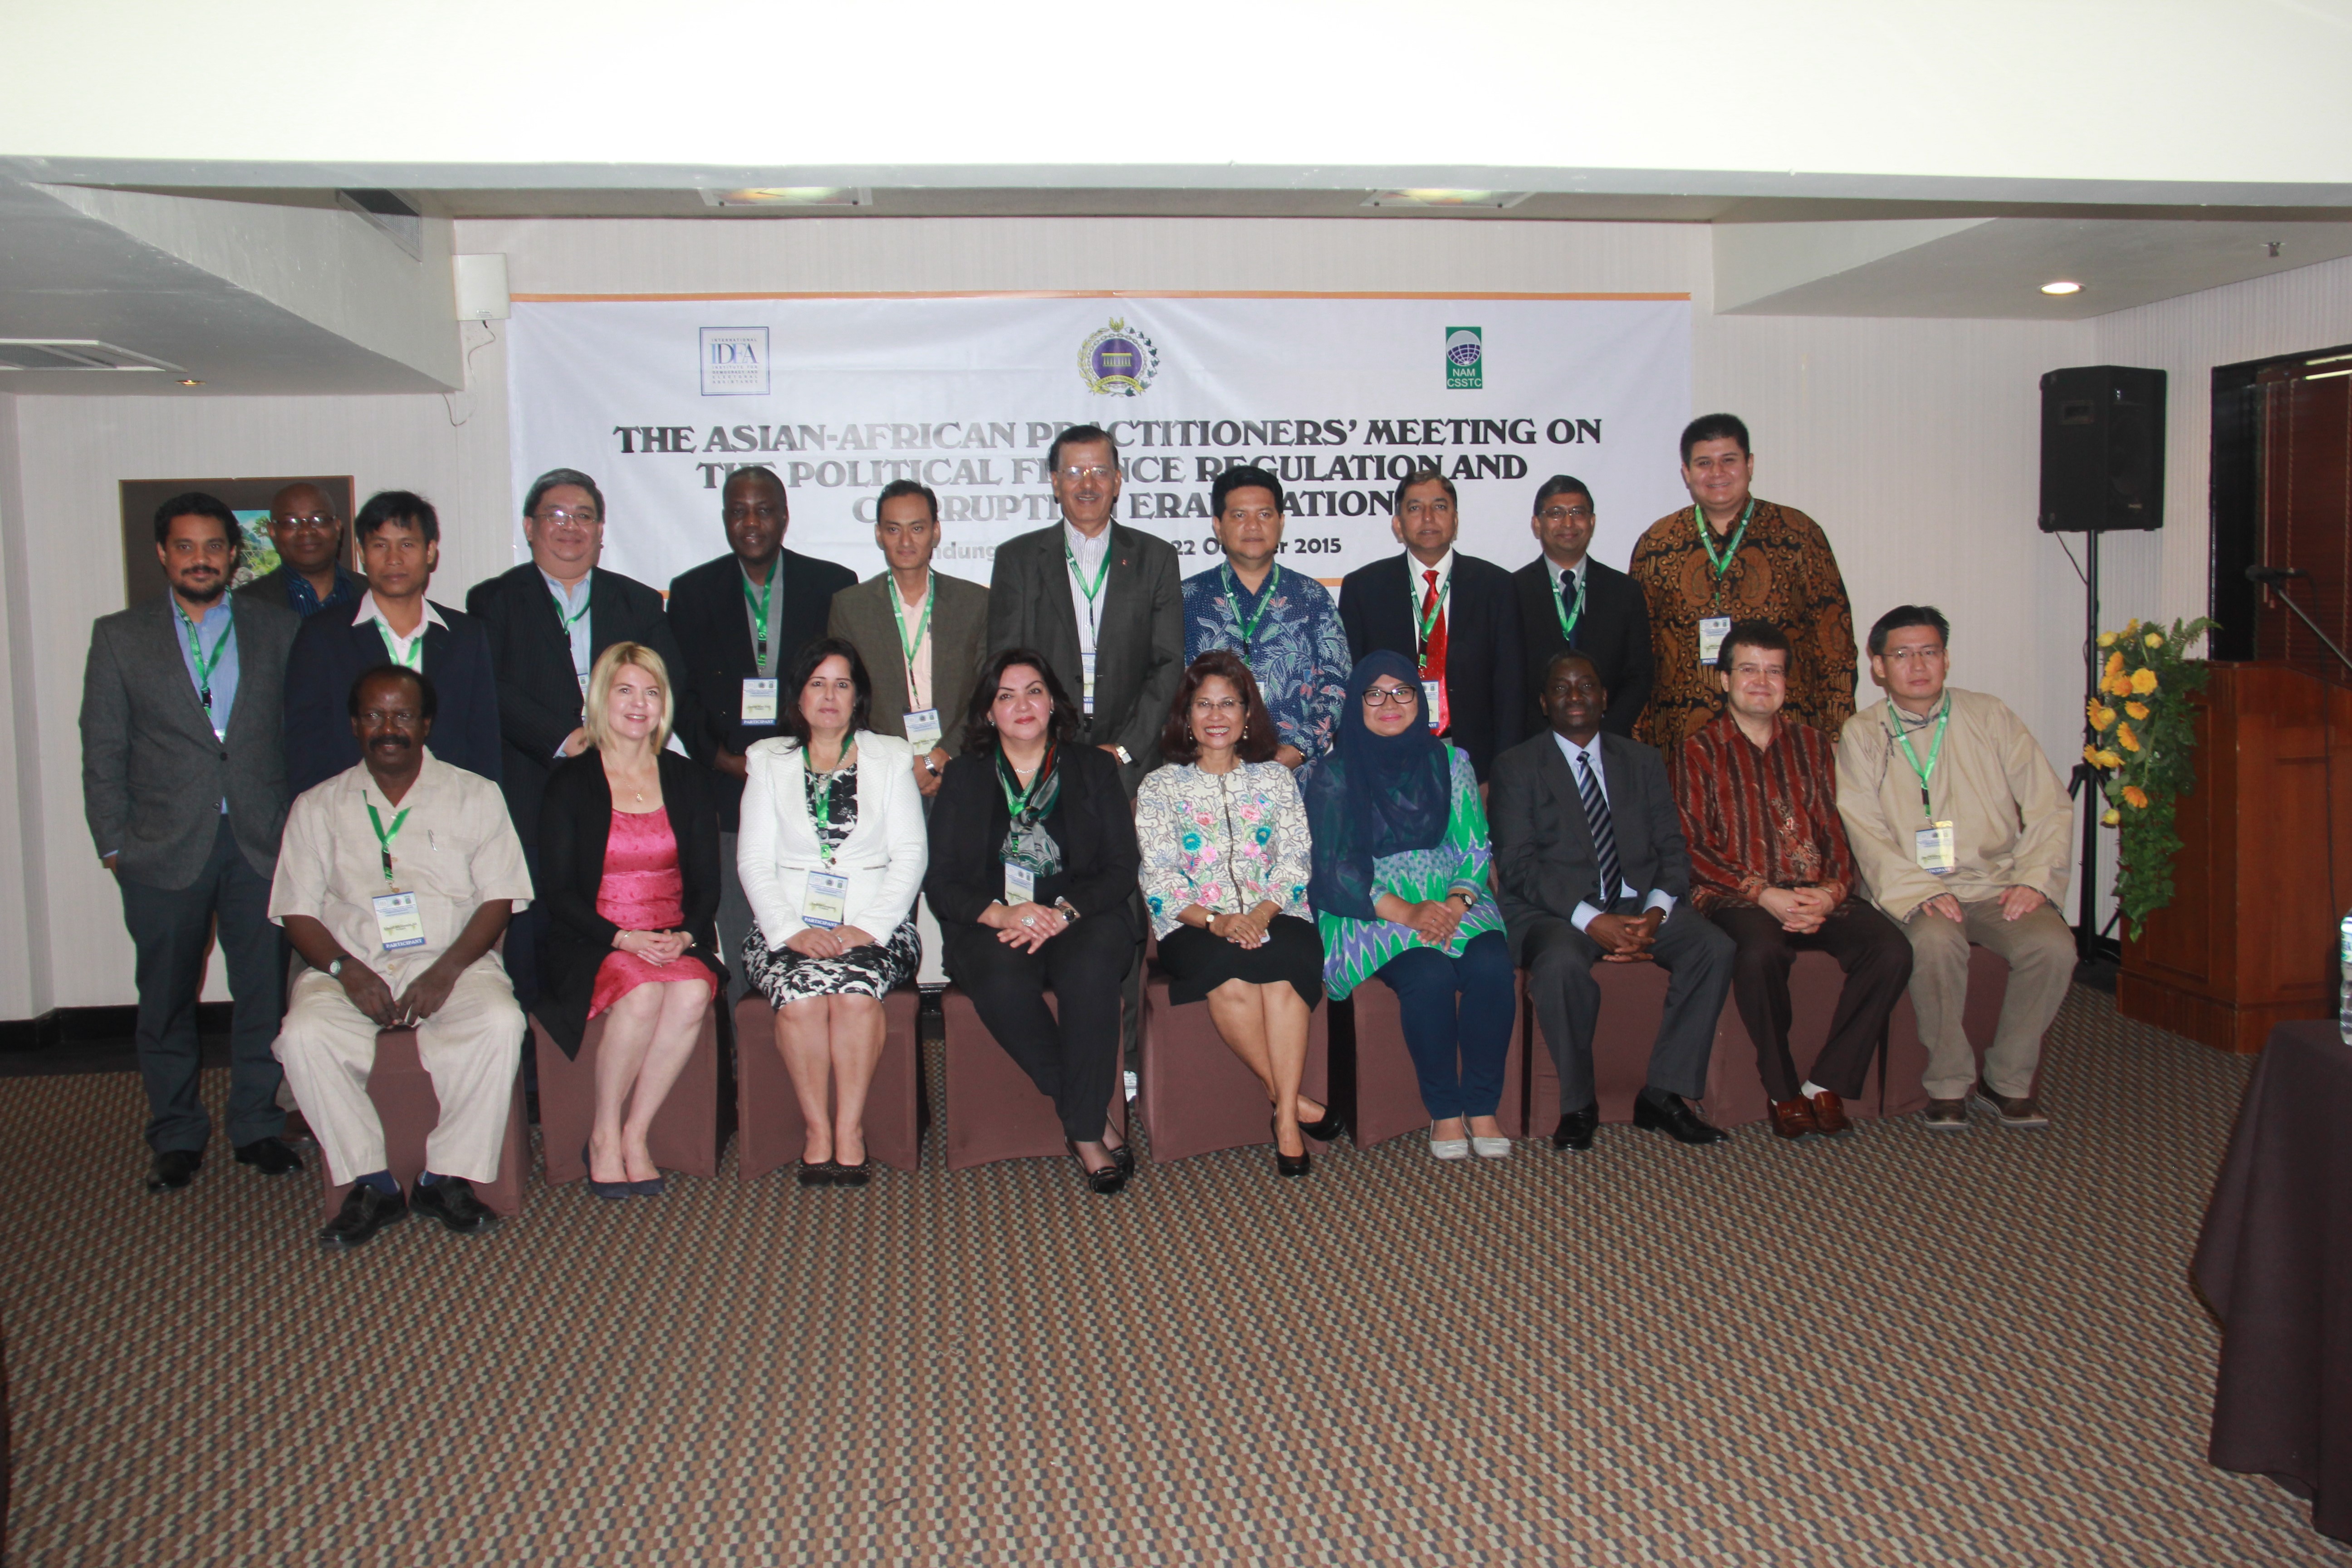 Asian-African practitioners’ meeting on political finance regulation and the eradication of corruption